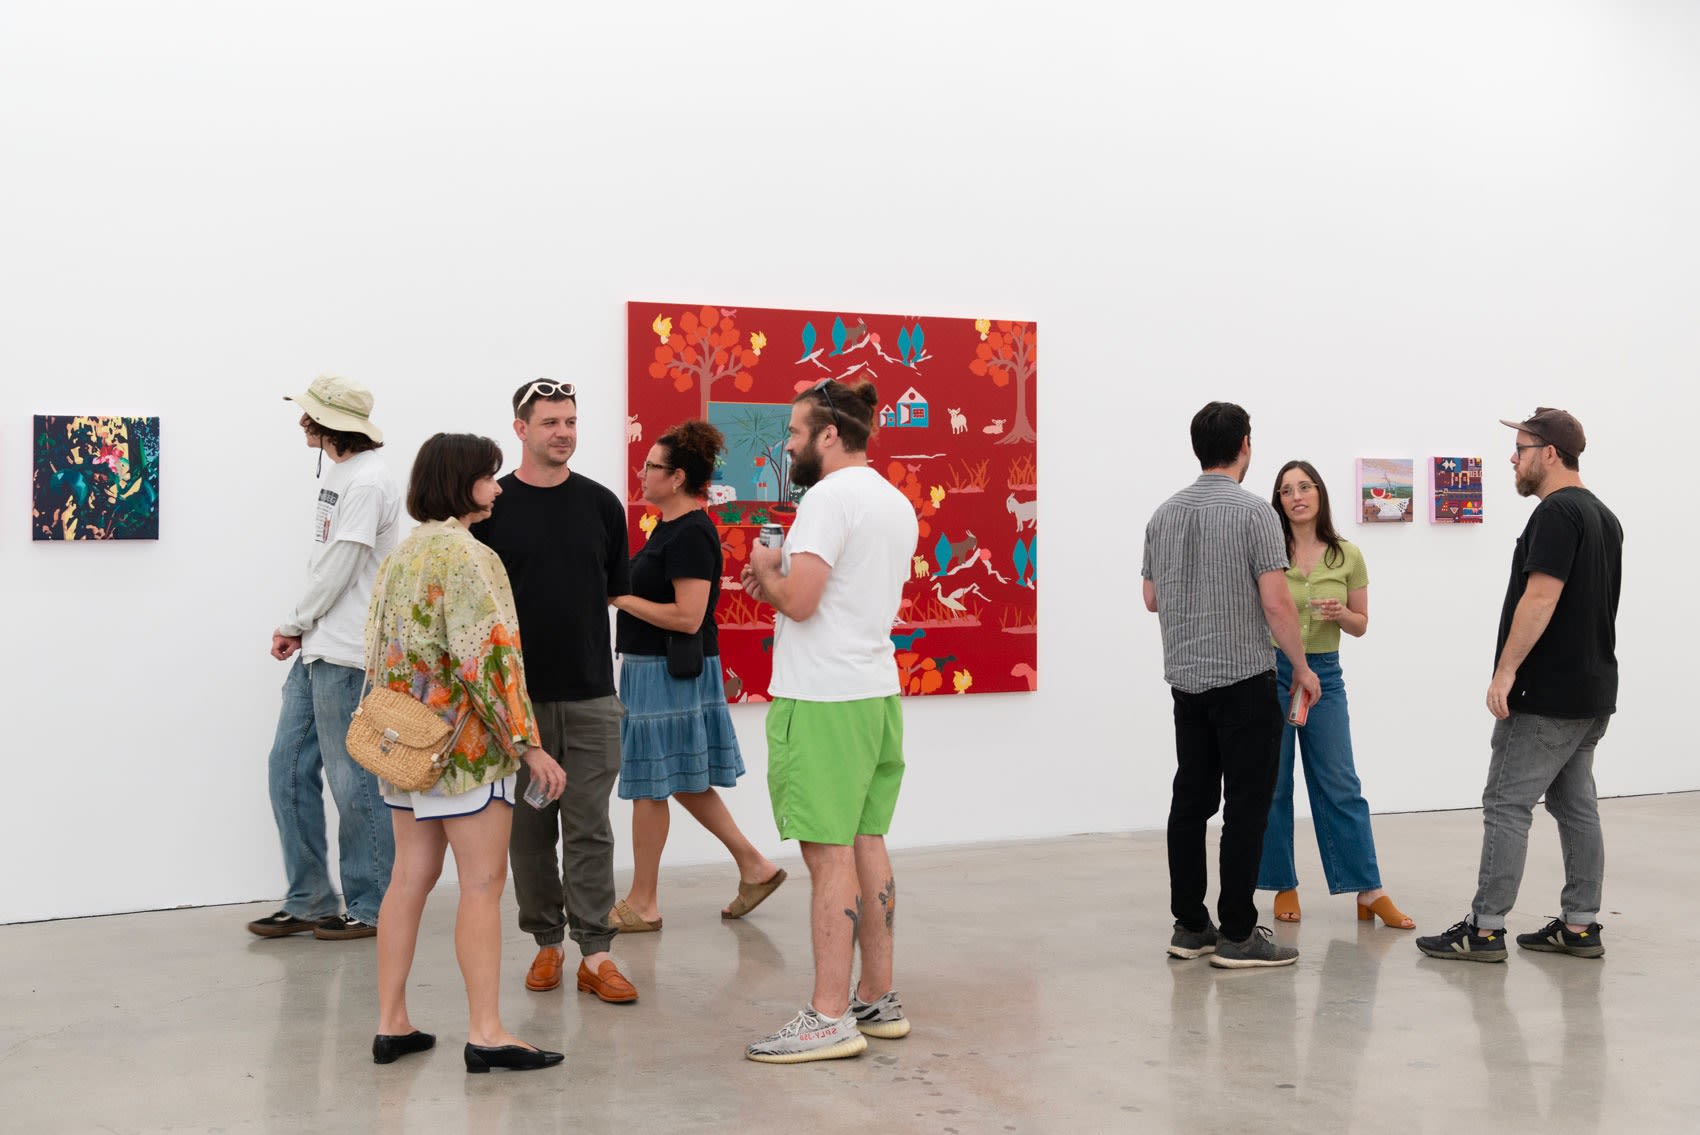 Francisco Díaz Scotto speaks to attendees in front of his bright red painting.